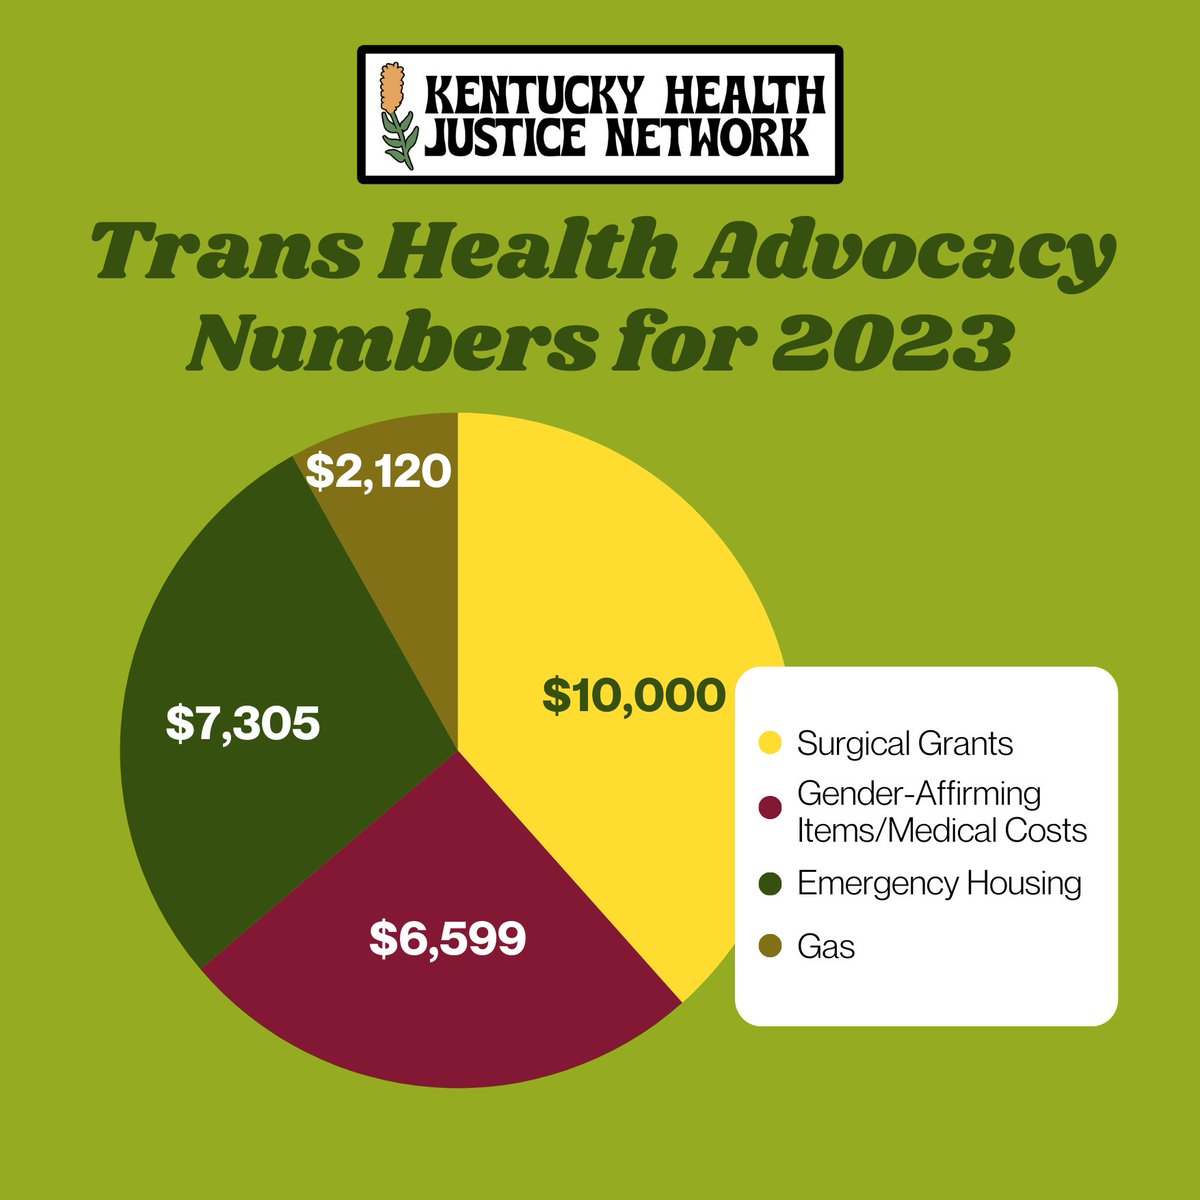 Imagine a world where everyone can access gender-affirming care without barriers. Your donation to KHJN's Fund-A-Thon can help make this a reality for Kentuckians. Let's come together and support inclusive healthcare for all. Donate today at fund.nnaf.org/khjn24